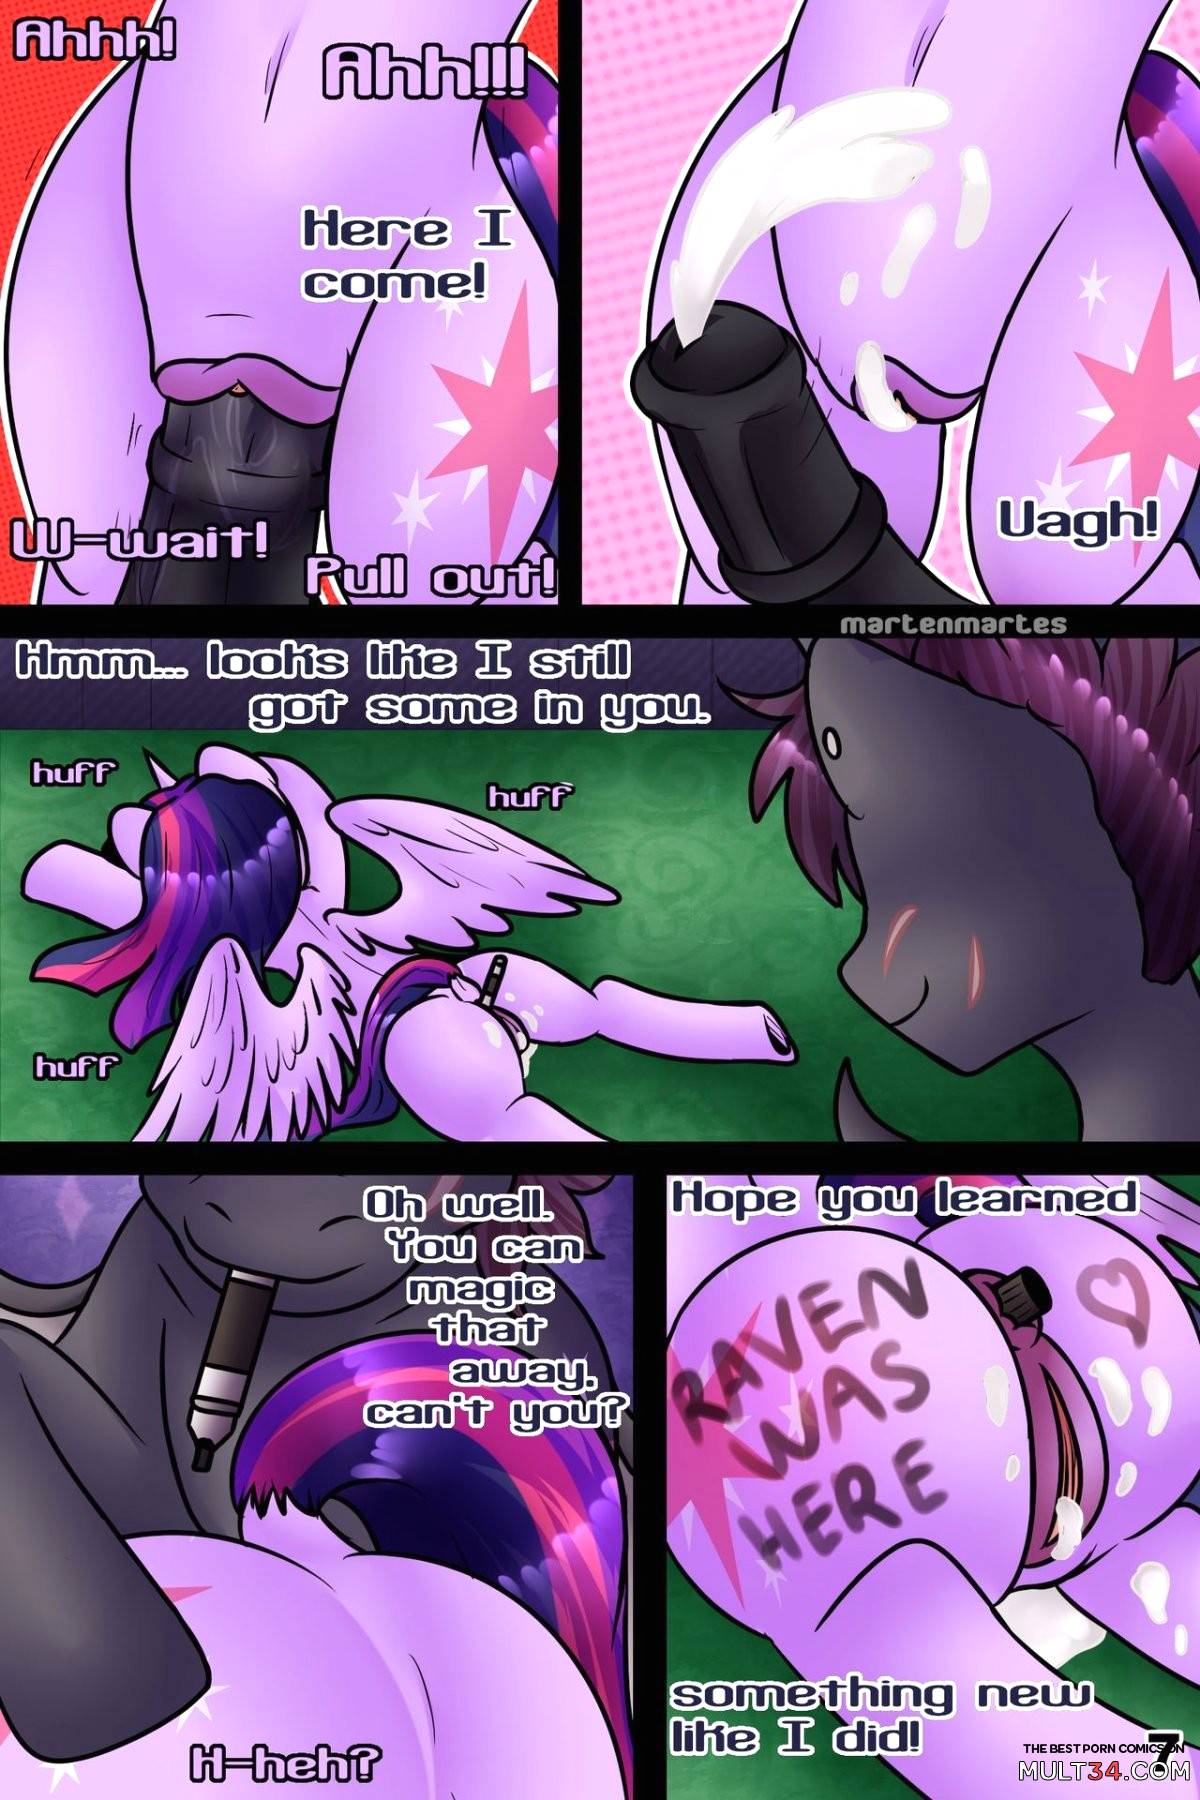 friendship lesson went sexual page 8